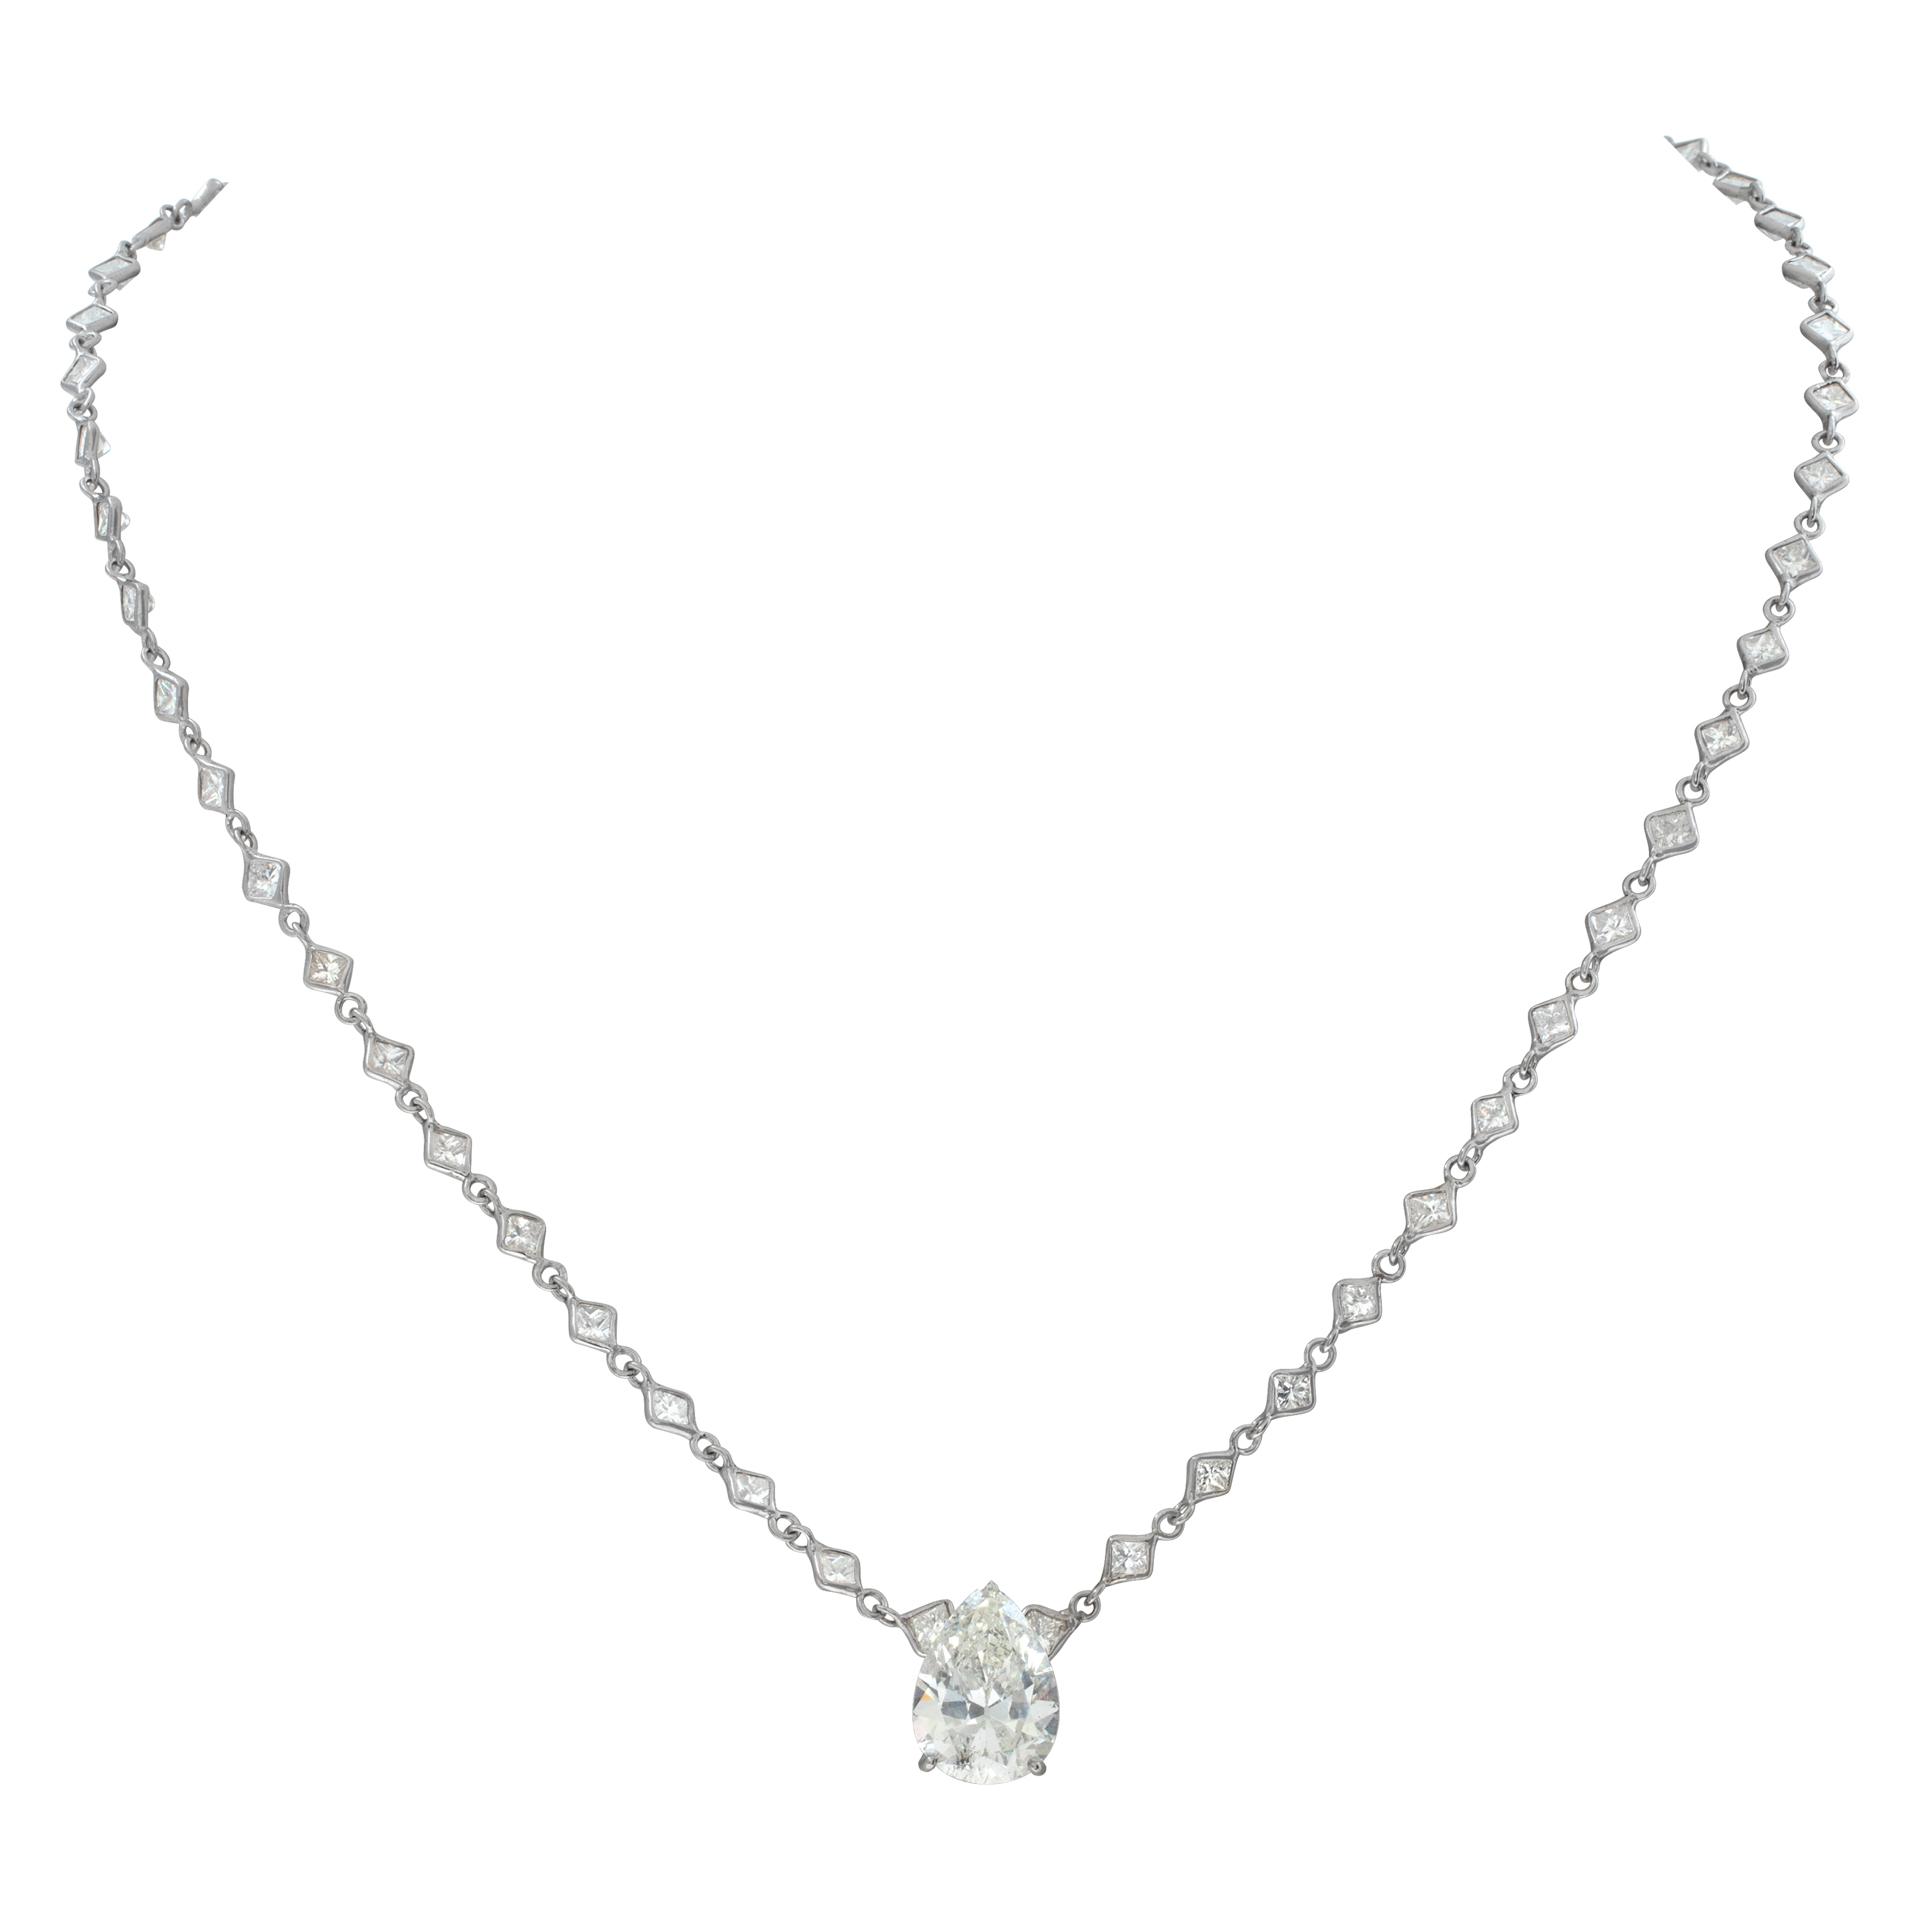 GIA certified pear shaped 3.84 carats on a necklace set with approximately 5 carats in princess cut diamonds by-the-inch (Stones)